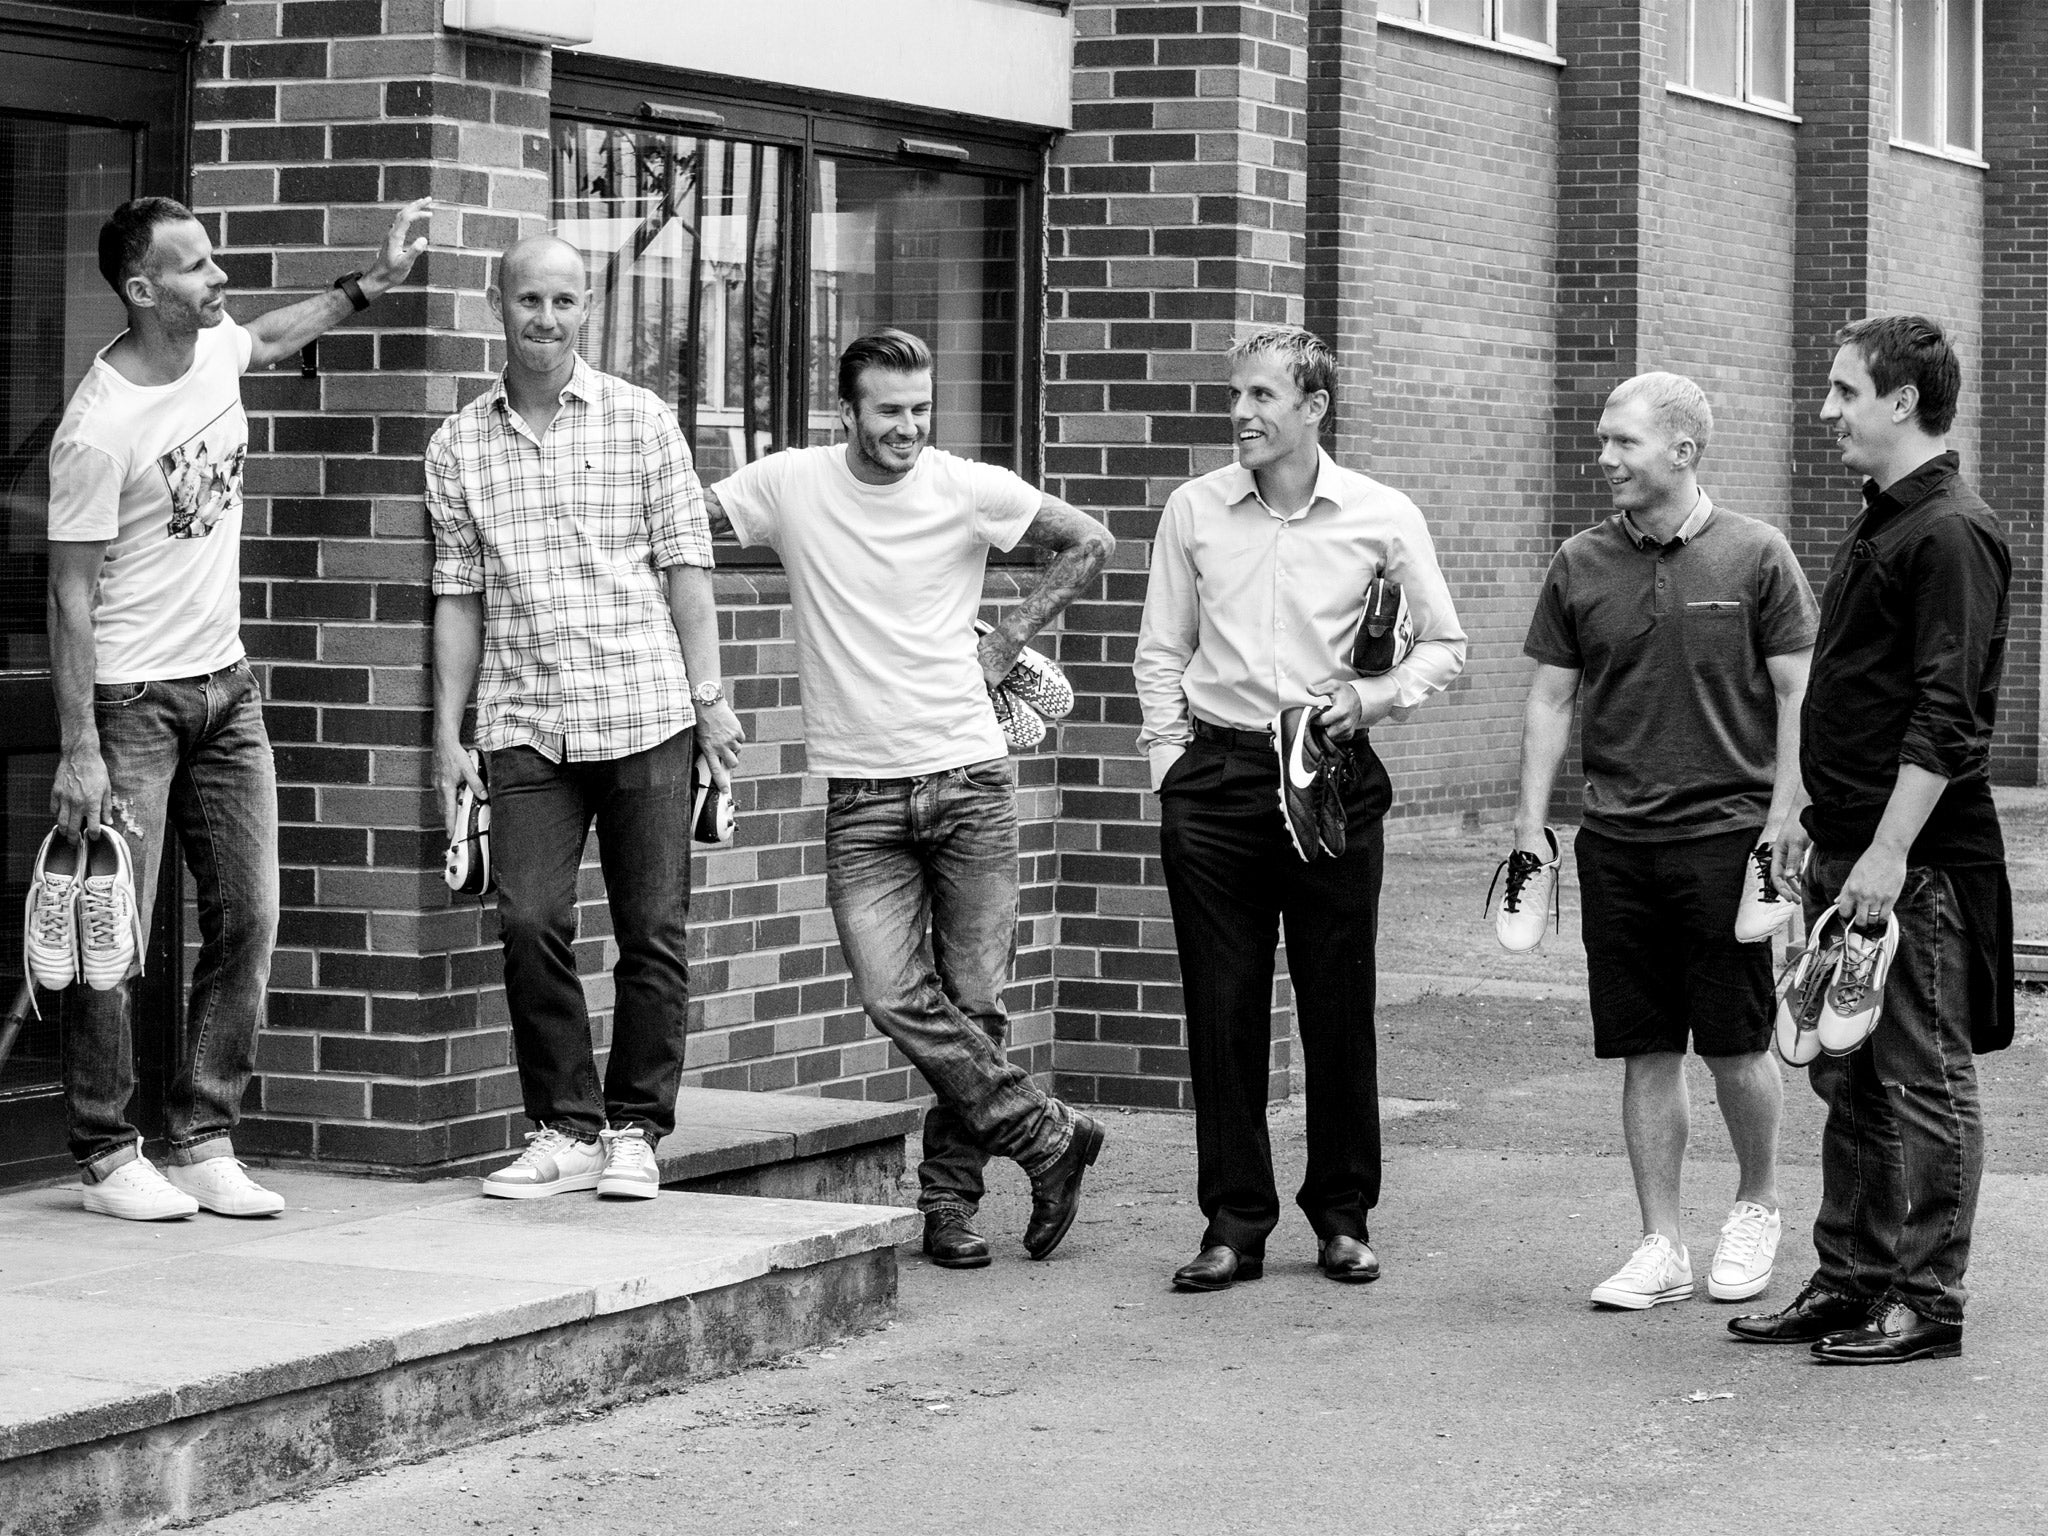  A black and white image of the Class of 92 Manchester United players: Nicky Butt, David Beckham, Ryan Giggs, Paul Scholes, and Gary Neville.